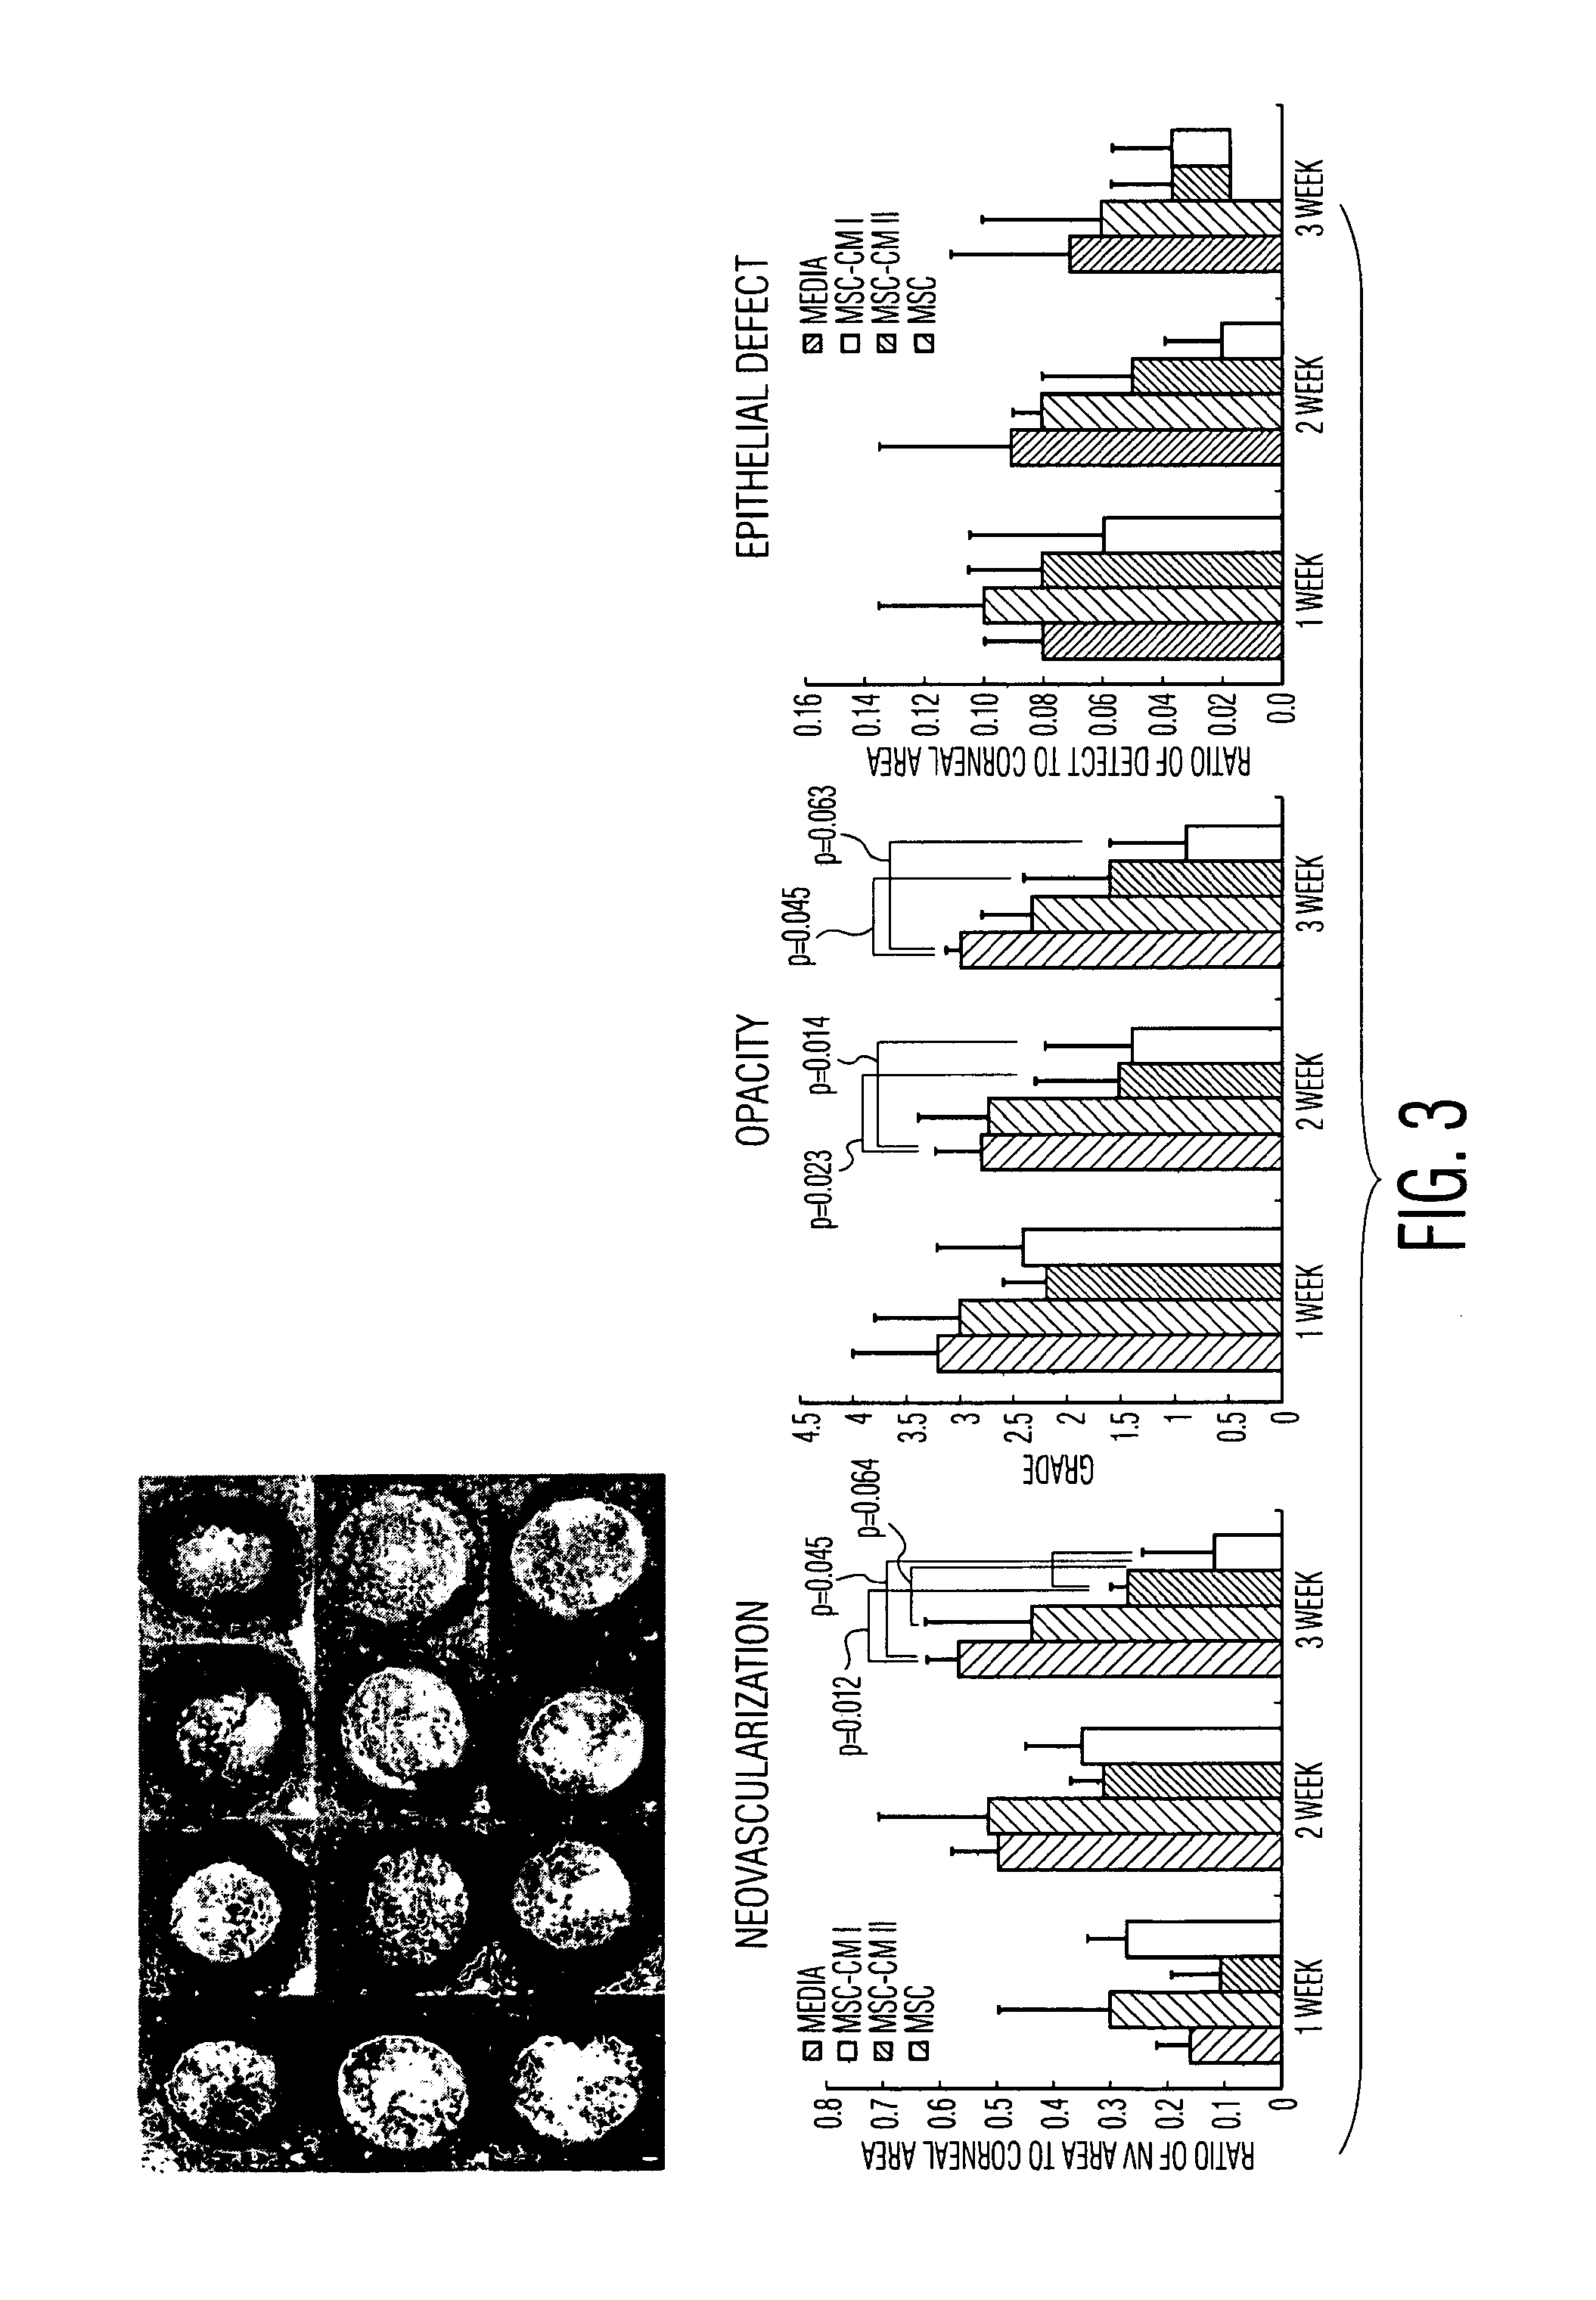 Adult stem cells/progenitor cells and stem cell proteins for treatment of eye injuries and diseases